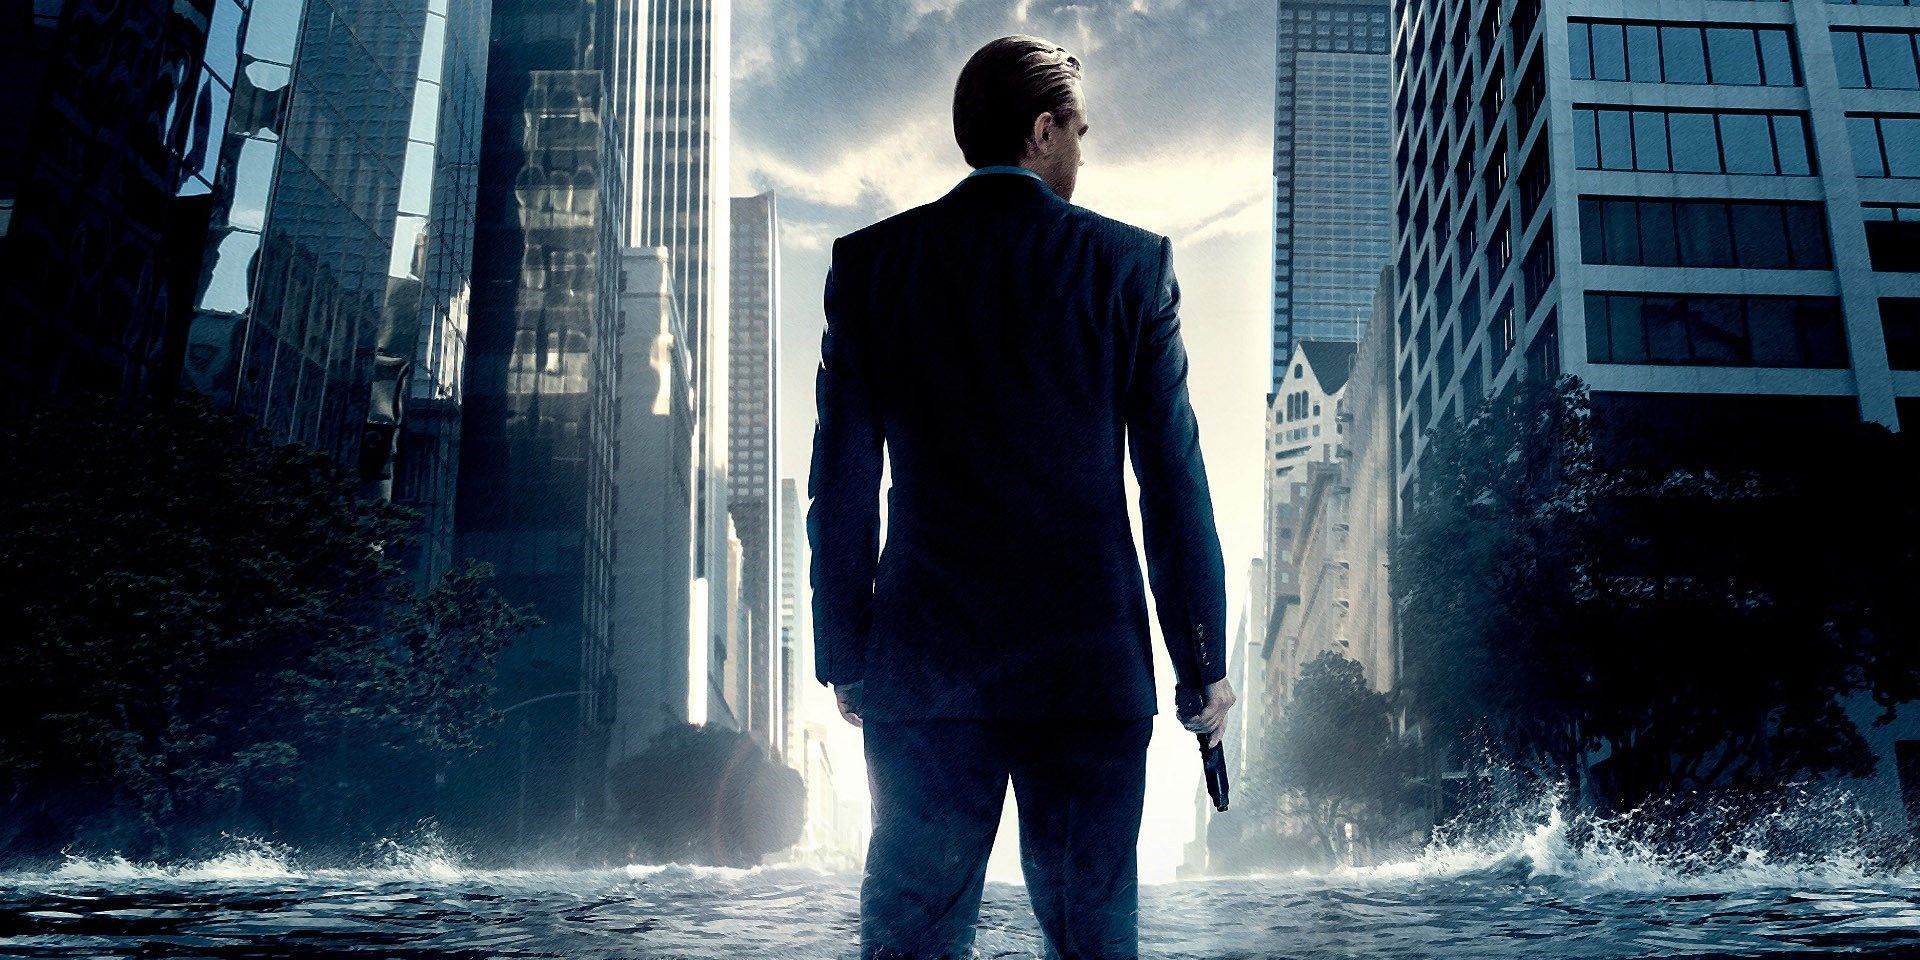 Crop of the Inception poster of Dom standing in a flooded street holding a gun